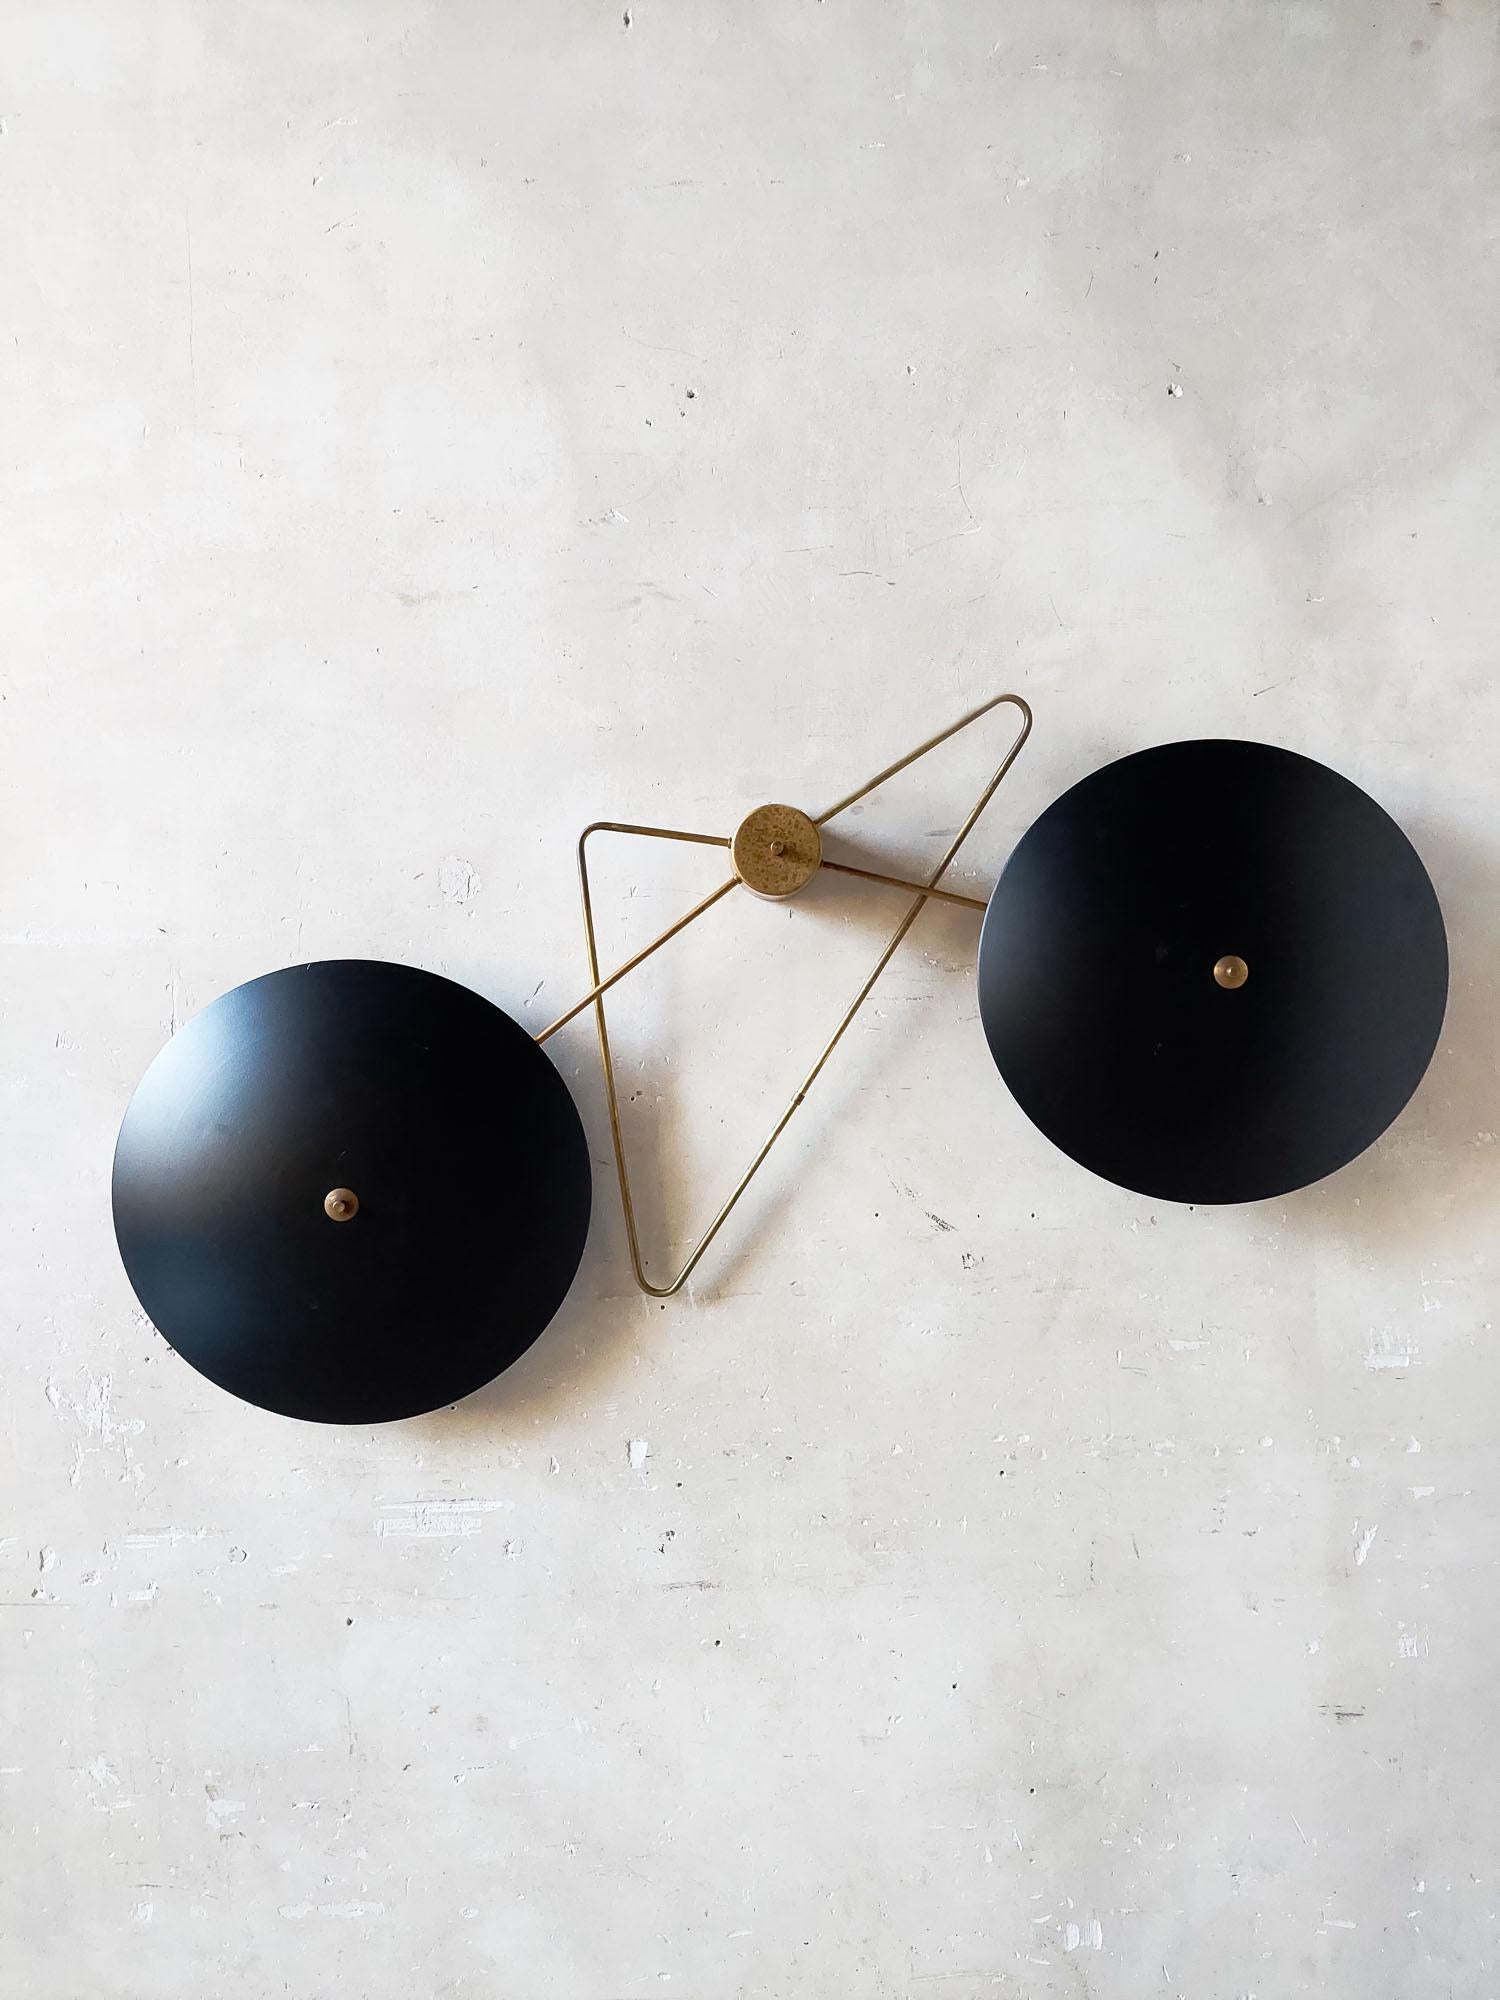 Double reflector wallight by Bruno Gatta for Stillnovo. A large brass frame with two large black powder-coated metal saucer lamps, round shell reflectors. Each has 3 lightpoints.

total width 150 cm, diameter saucers 53 cm each